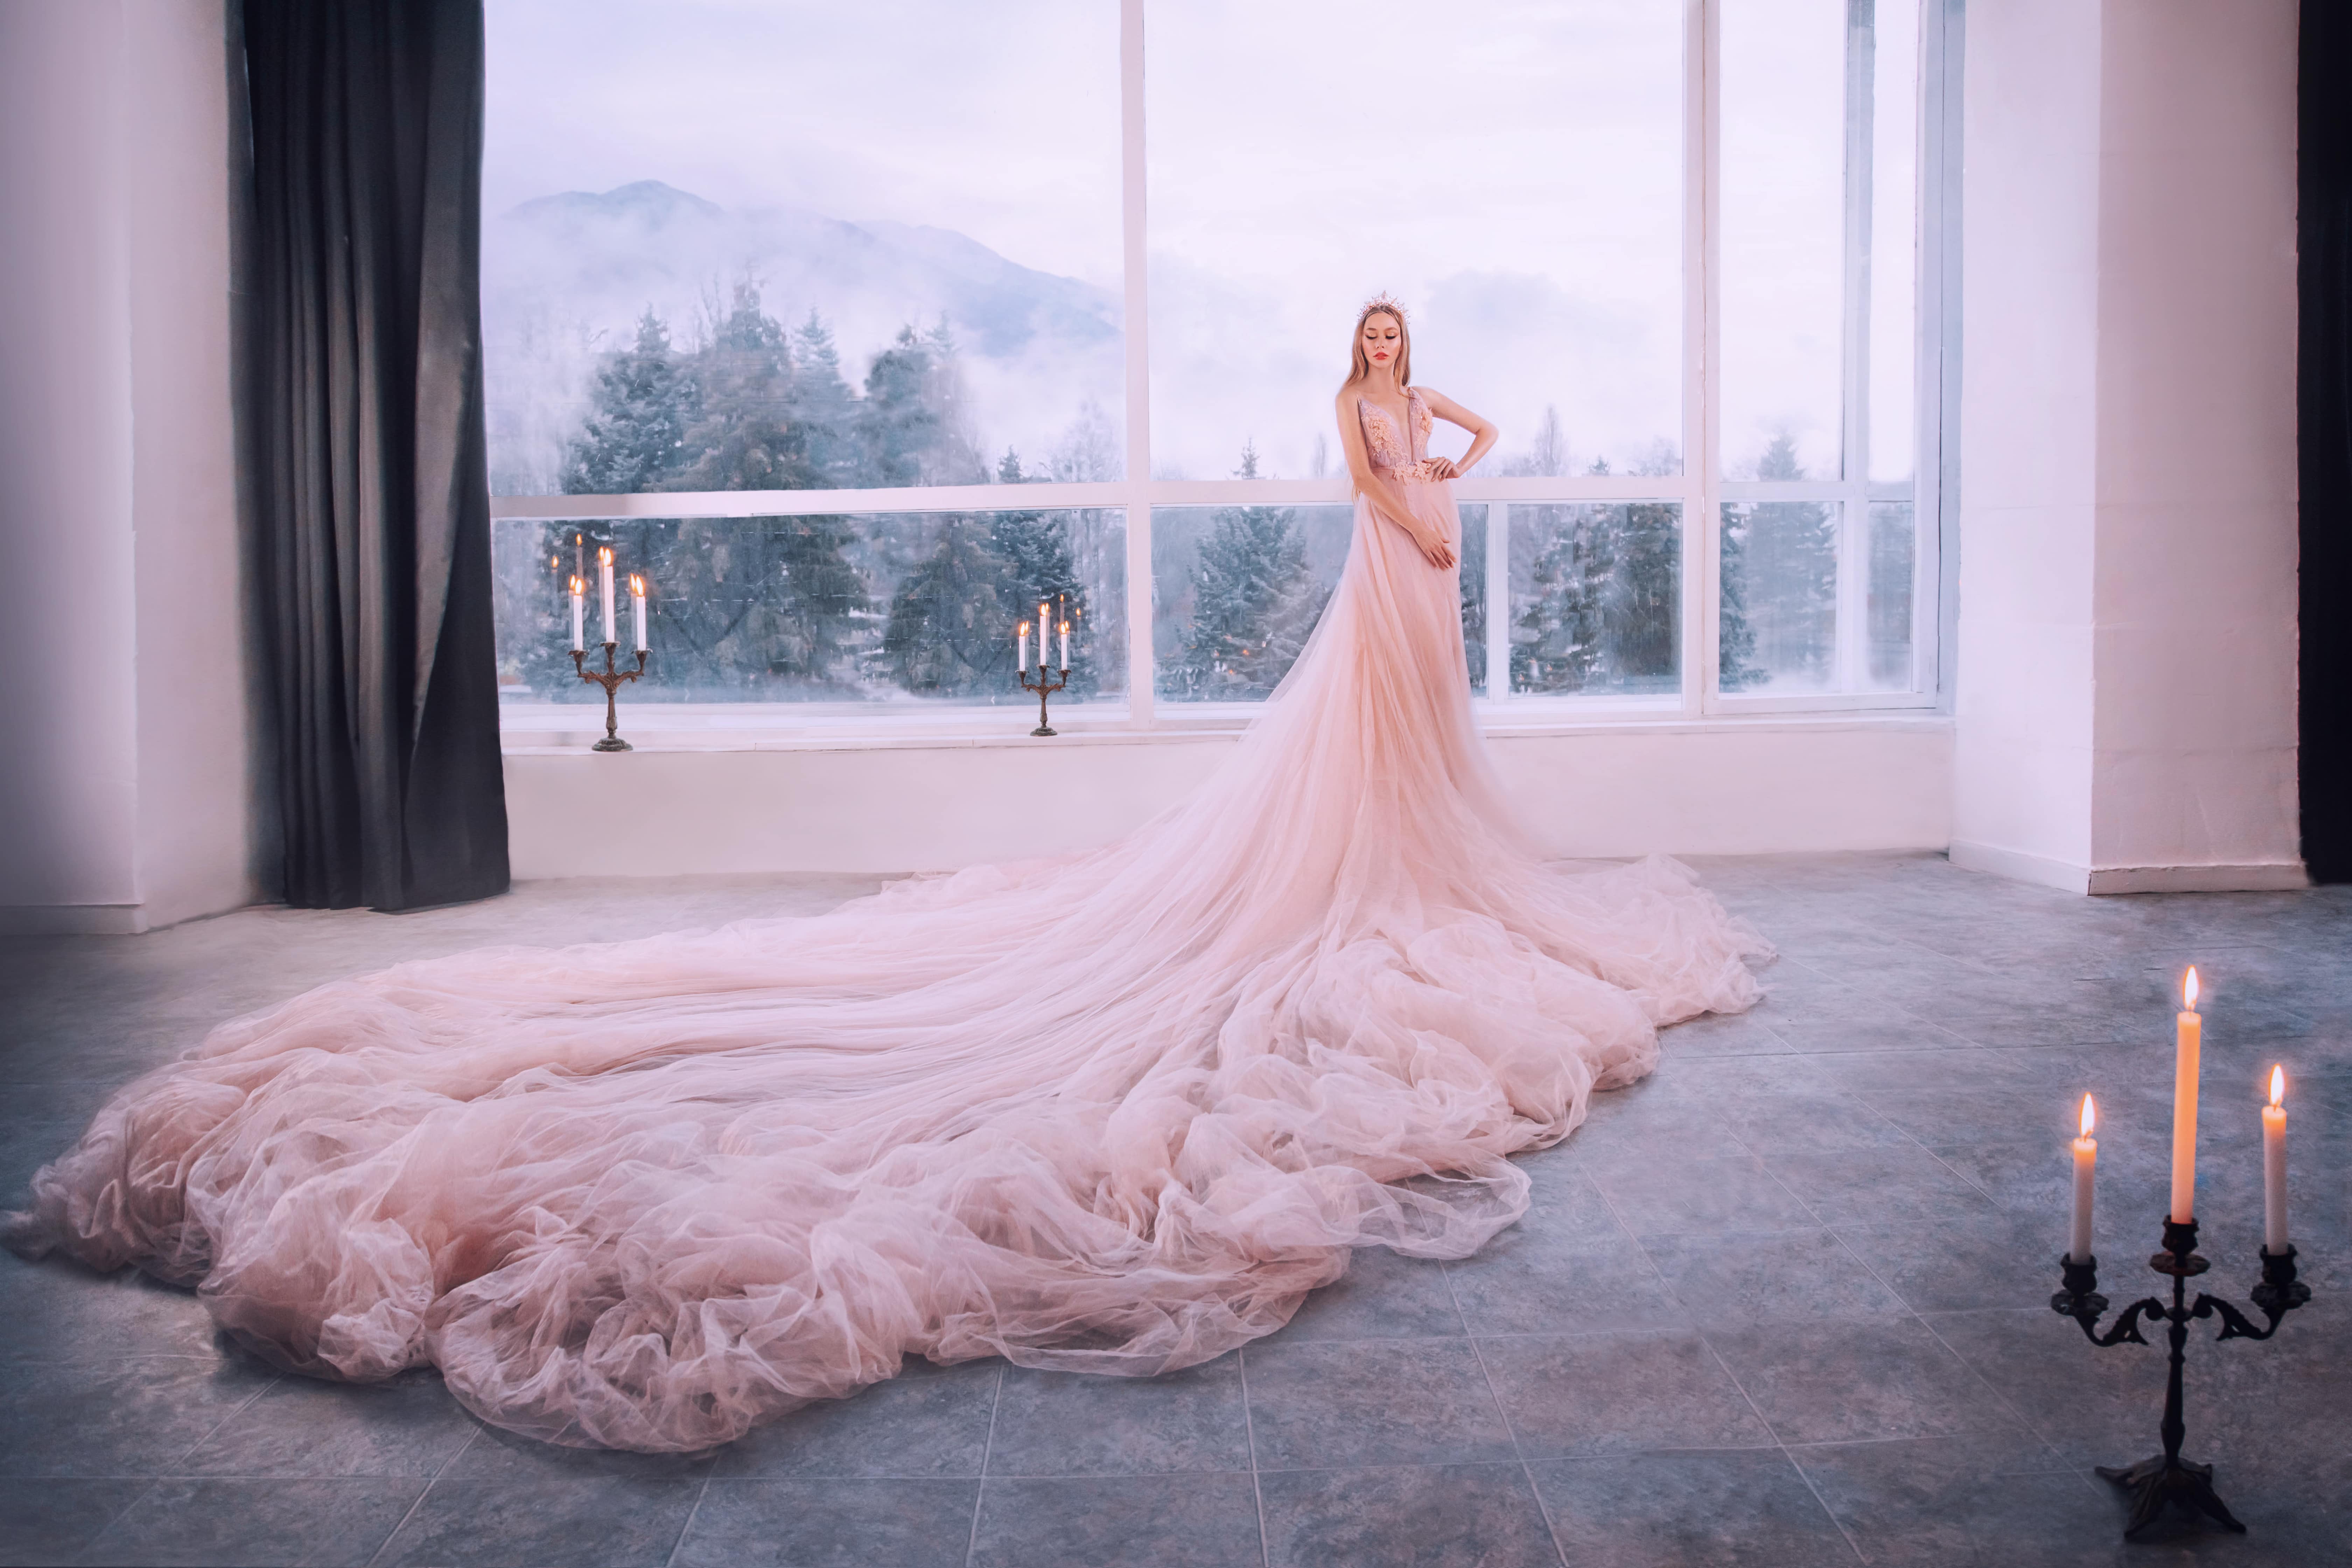 Fantasy girl princess in luxurious pink fluffy lush dress stands in castle room by vintage window with winter nature, forest trees mountains. Woman queen bride in wedding dress, long train, hem skirt